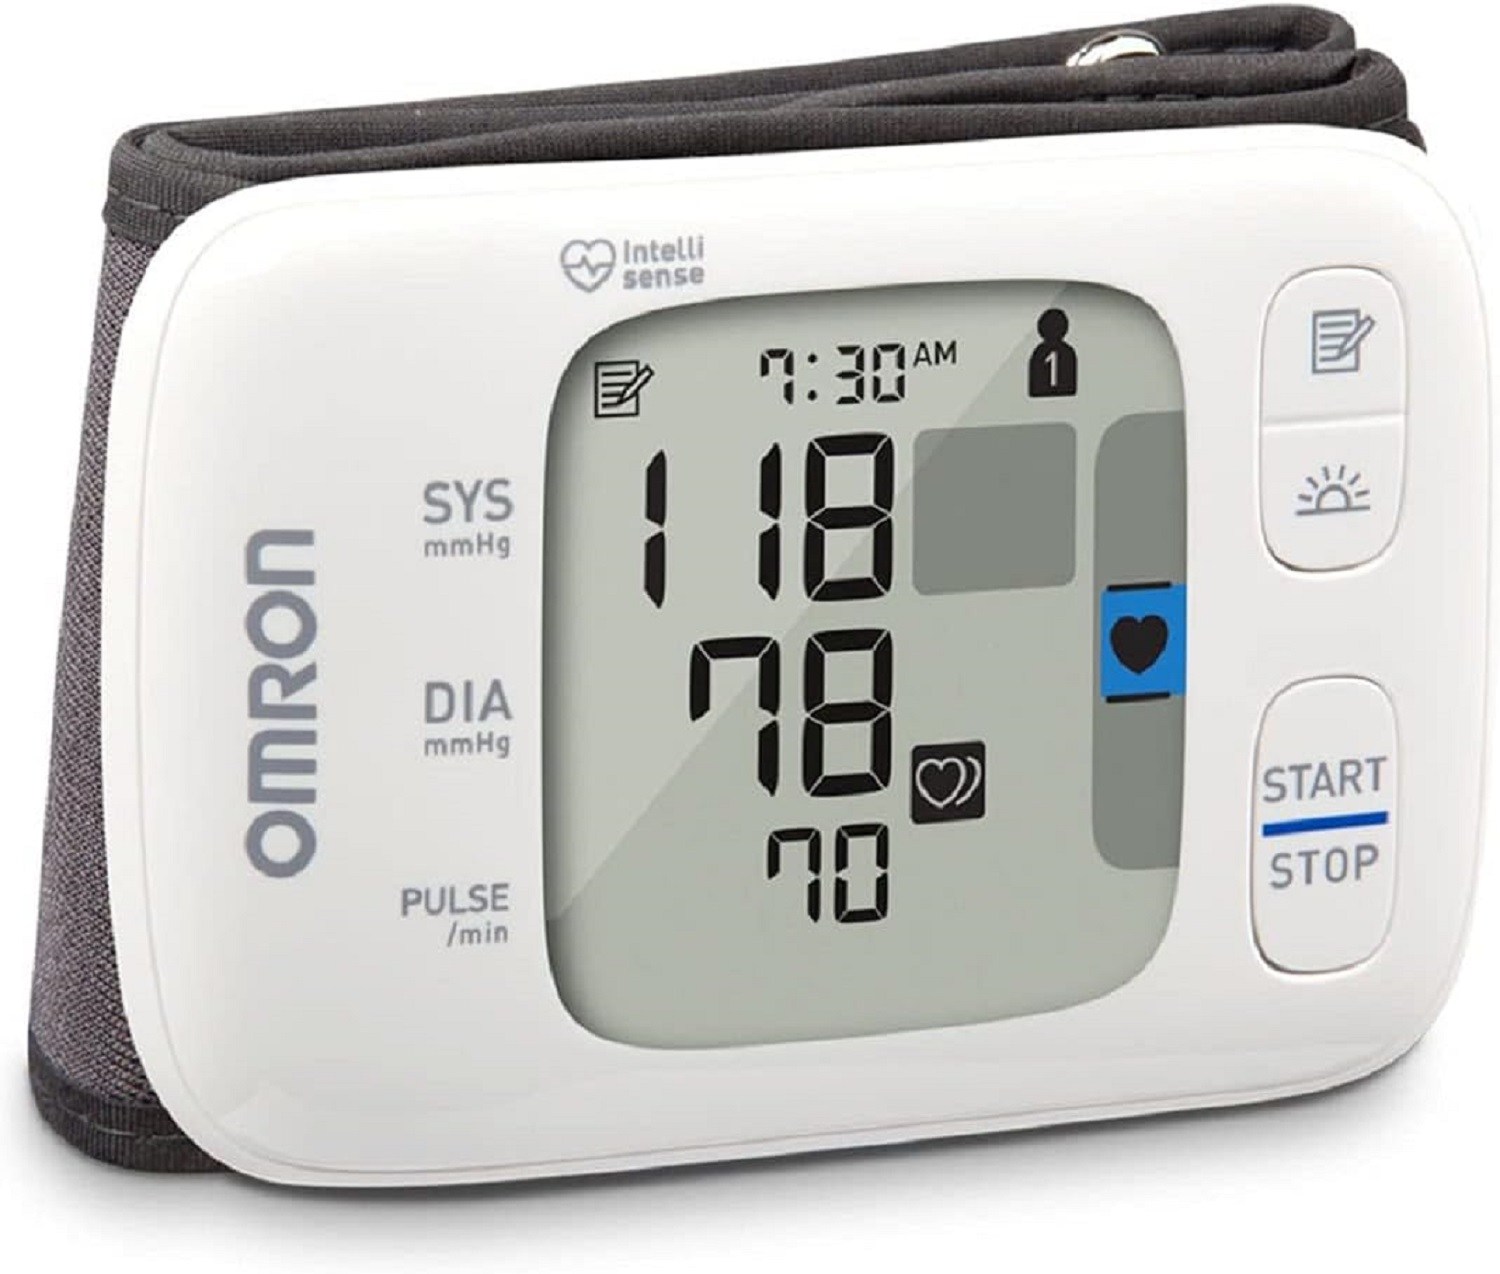 Omron BP5100 Bronze Upper Arm Blood Pressure Monitor for sale